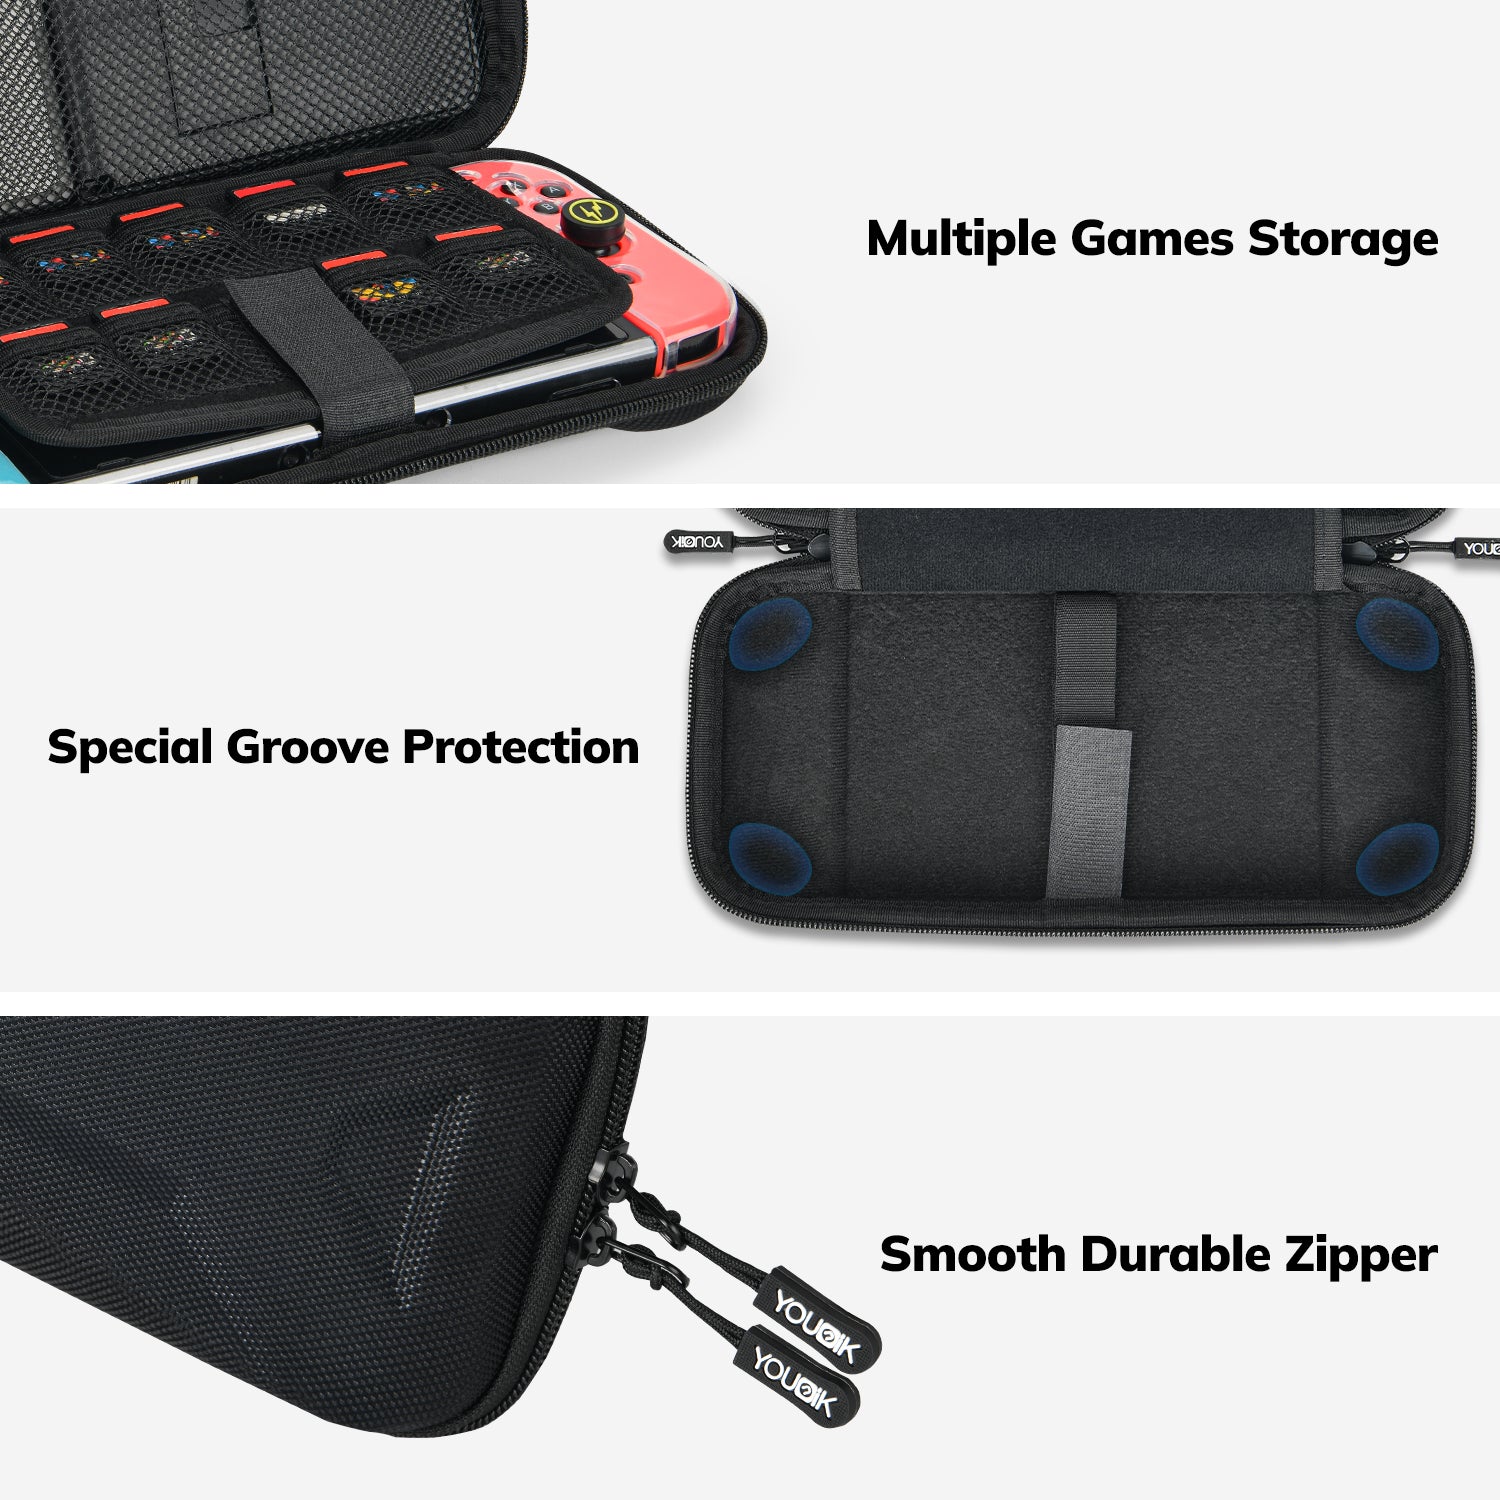 Younik Y Design Slim Travel Case for NS Switch, Switch Carrying Case, Switch Accessories